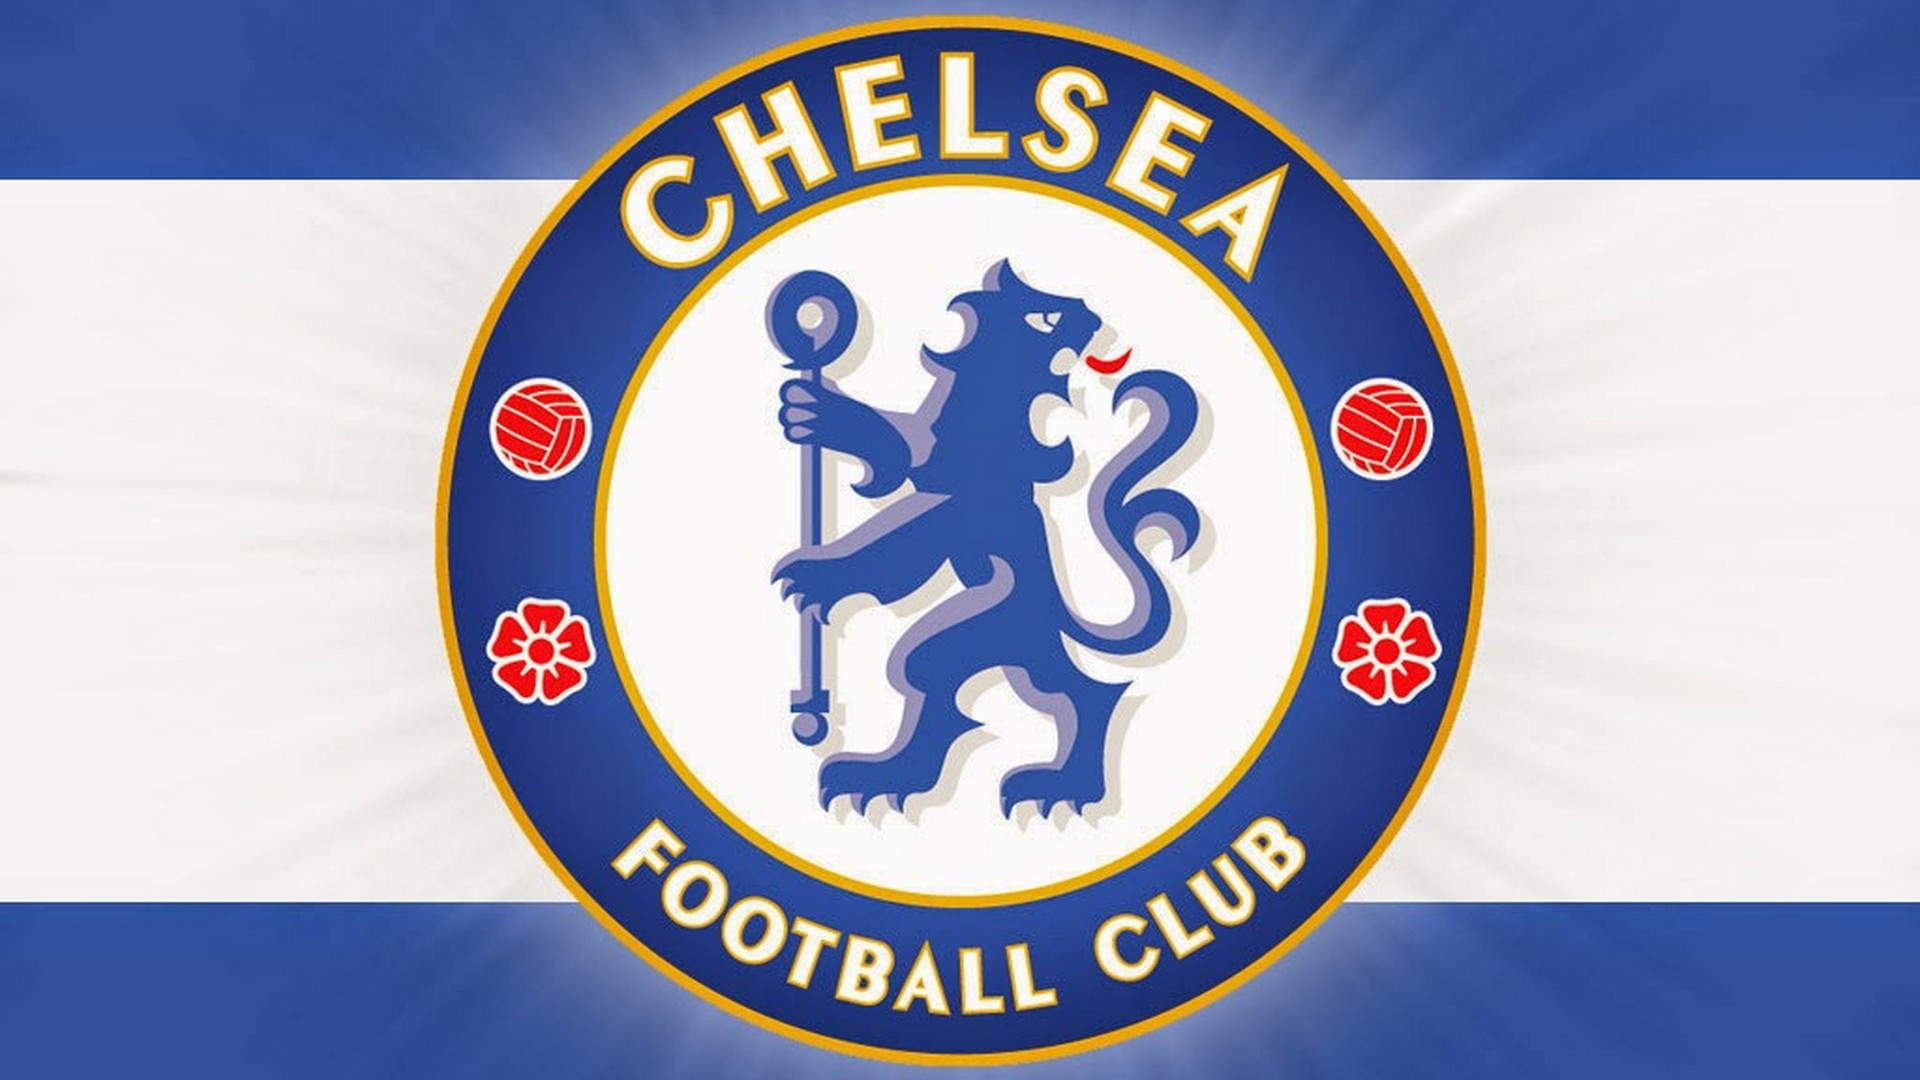 Chelsea Football Club Wallpaper With Resolution 1920X1080 pixel. You can make this wallpaper for your Mac or Windows Desktop Background, iPhone, Android or Tablet and another Smartphone device for free